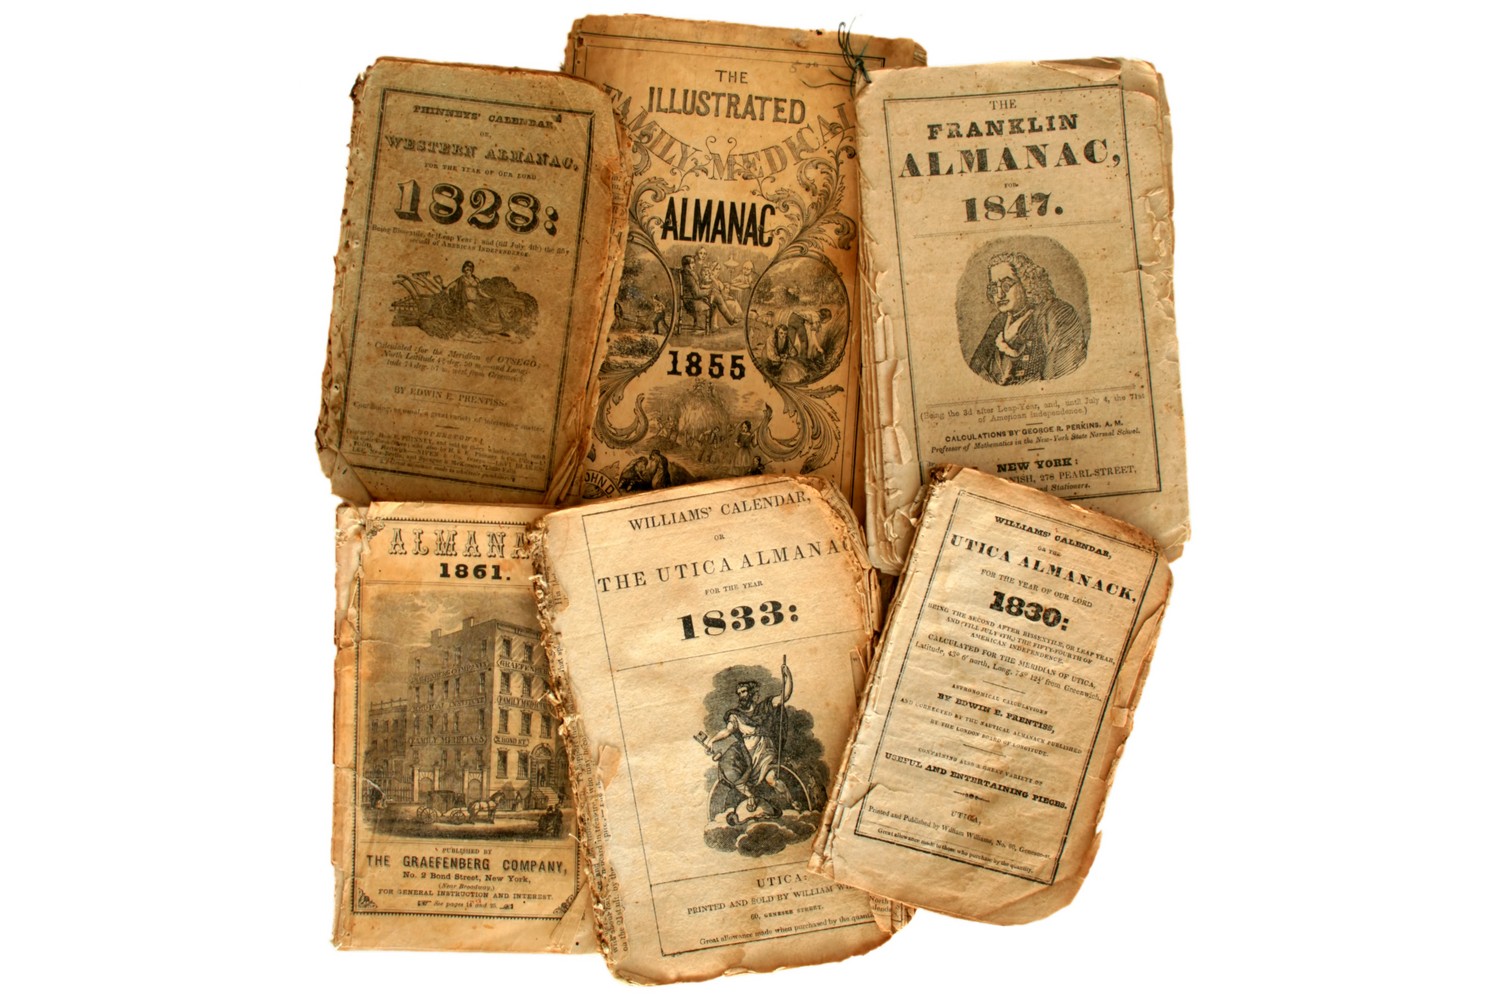 The Historical past of the Extinct Farmer’s Almanac and Why Its Repute Endures